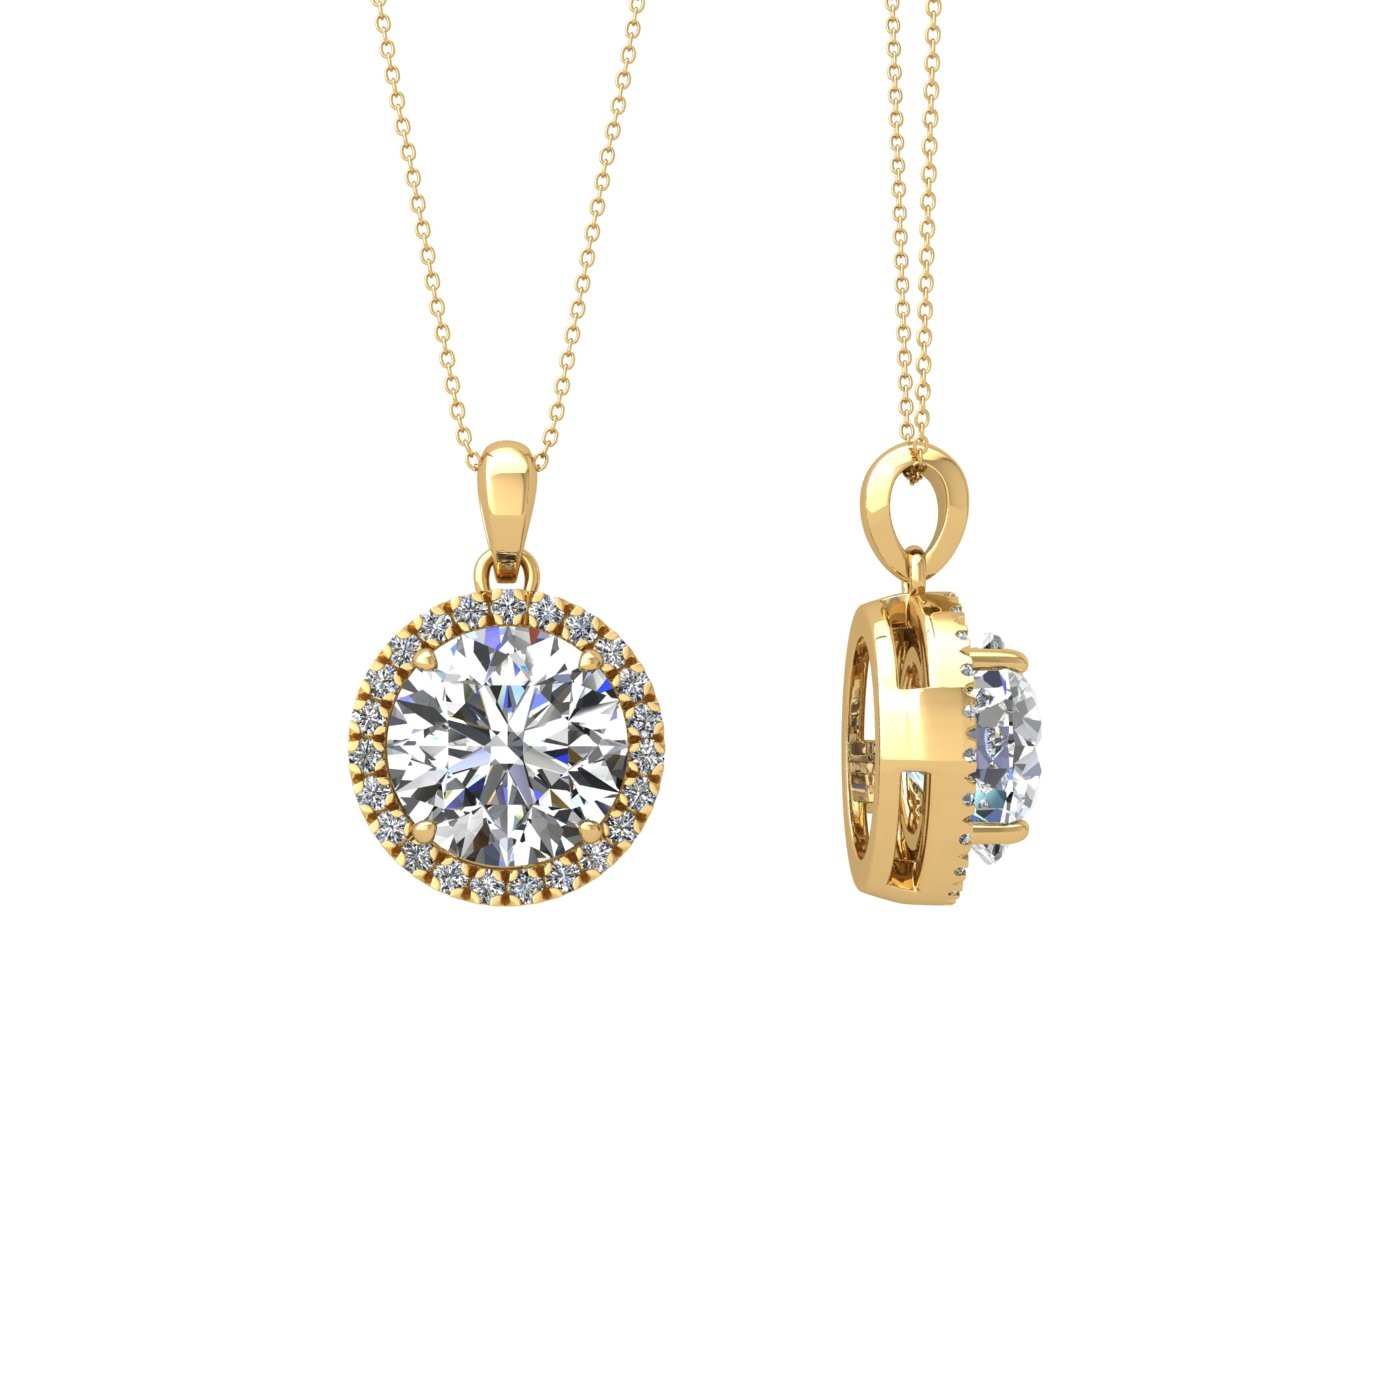 18k yellow gold  0,3 ct 4 prong round shape diamond pendant with diamond pavÉ set halo including chain seperate from the pendant Photos & images